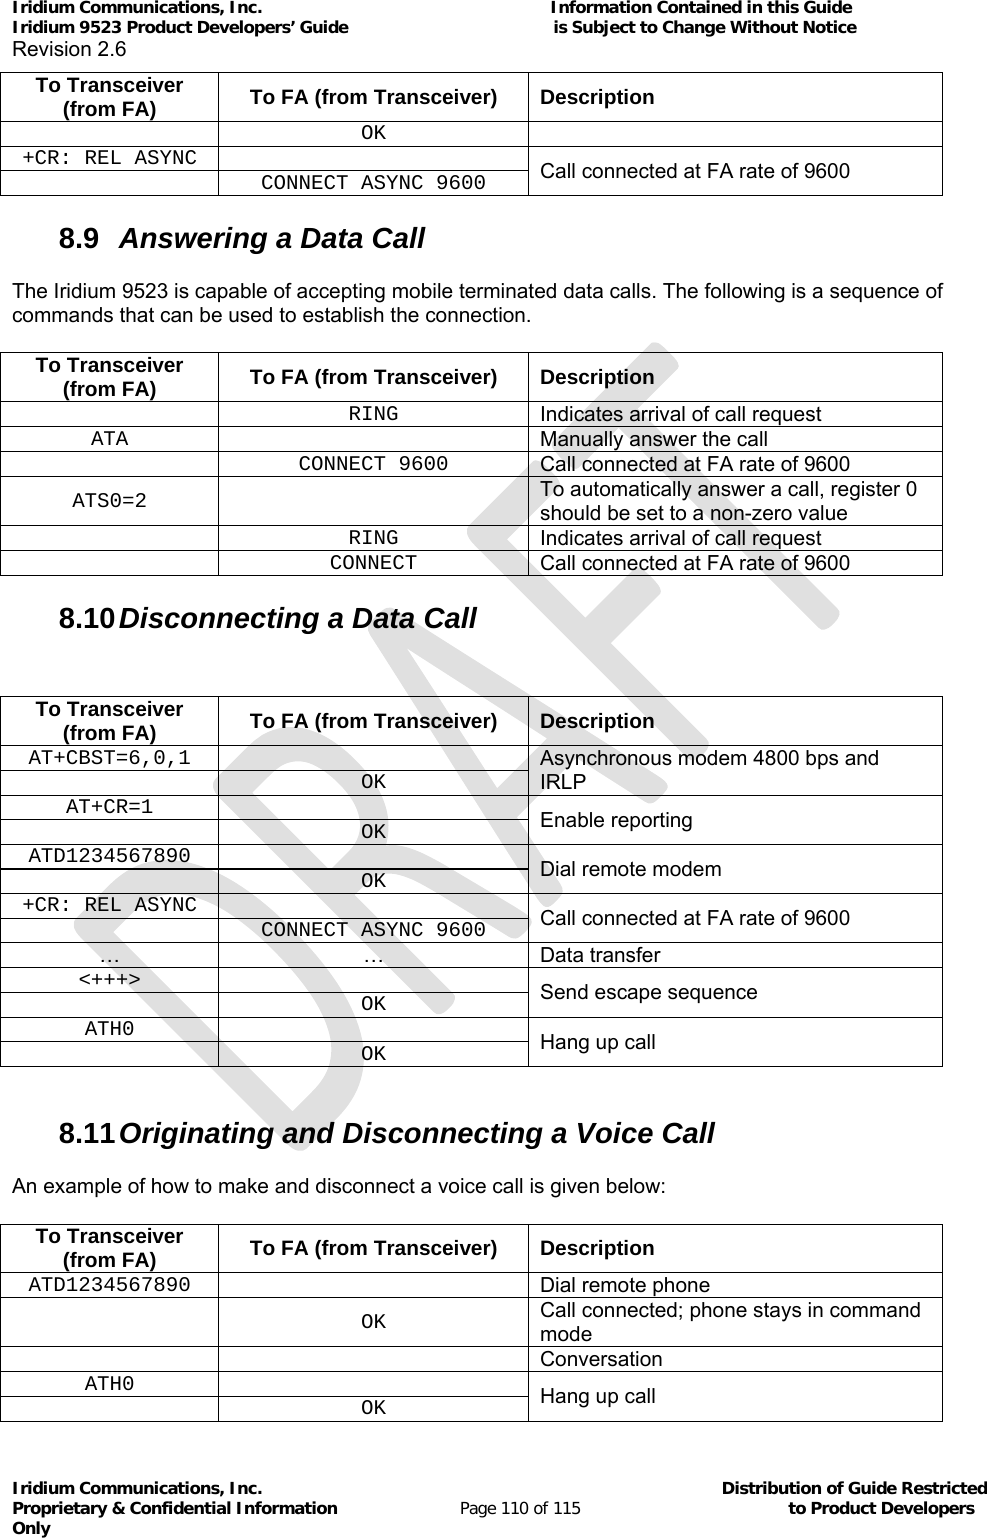 Iridium Communications, Inc.                                                           Information Contained in this Guide  Iridium 9523 Product Developers’ Guide                                          is Subject to Change Without Notice  Revision 2.6 Iridium Communications, Inc.                                          Distribution of Guide Restricted Proprietary &amp; Confidential Information                         Page 110 of 115                                        to Product Developers Only           To Transceiver (from FA)  To FA (from Transceiver)  Description  OK +CR: REL ASYNC    Call connected at FA rate of 9600   CONNECT ASYNC 9600 8.9  Answering a Data Call The Iridium 9523 is capable of accepting mobile terminated data calls. The following is a sequence of commands that can be used to establish the connection. To Transceiver (from FA)  To FA (from Transceiver)  Description  RING Indicates arrival of call request ATA  Manually answer the call  CONNECT 9600 Call connected at FA rate of 9600 ATS0=2  To automatically answer a call, register 0 should be set to a non-zero value  RING Indicates arrival of call request  CONNECT Call connected at FA rate of 9600 8.10 Disconnecting a Data Call  To Transceiver (from FA)  To FA (from Transceiver)  Description AT+CBST=6,0,1  Asynchronous modem 4800 bps and IRLP  OK AT+CR=1  Enable reporting  OK ATD1234567890  Dial remote modem  OK +CR: REL ASYNC    Call connected at FA rate of 9600   CONNECT ASYNC 9600 … …Data transfer &lt;+++&gt;  Send escape sequence  OK ATH0  Hang up call  OK  8.11 Originating and Disconnecting a Voice Call An example of how to make and disconnect a voice call is given below: To Transceiver (from FA)  To FA (from Transceiver)  Description ATD1234567890  Dial remote phone  OK Call connected; phone stays in command mode   Conversation ATH0  Hang up call  OK 